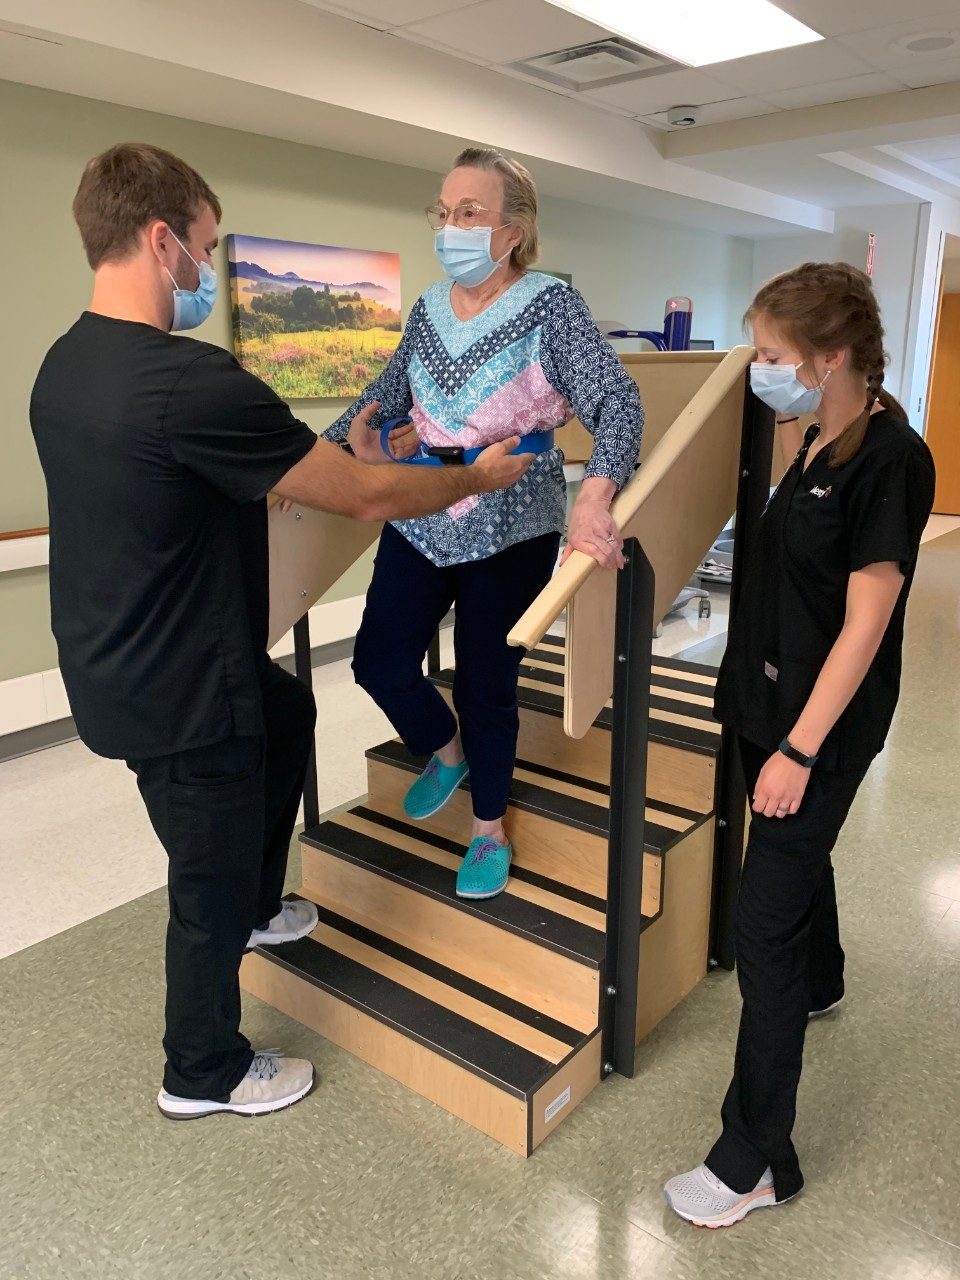 Physical Therapist Houston Talmage, left, and Occupational Therapist Allison Grant, right, work with patient Beverly Fleeger in the Mercy Hospital Northwest Arkansas inpatient rehabilitation unit.